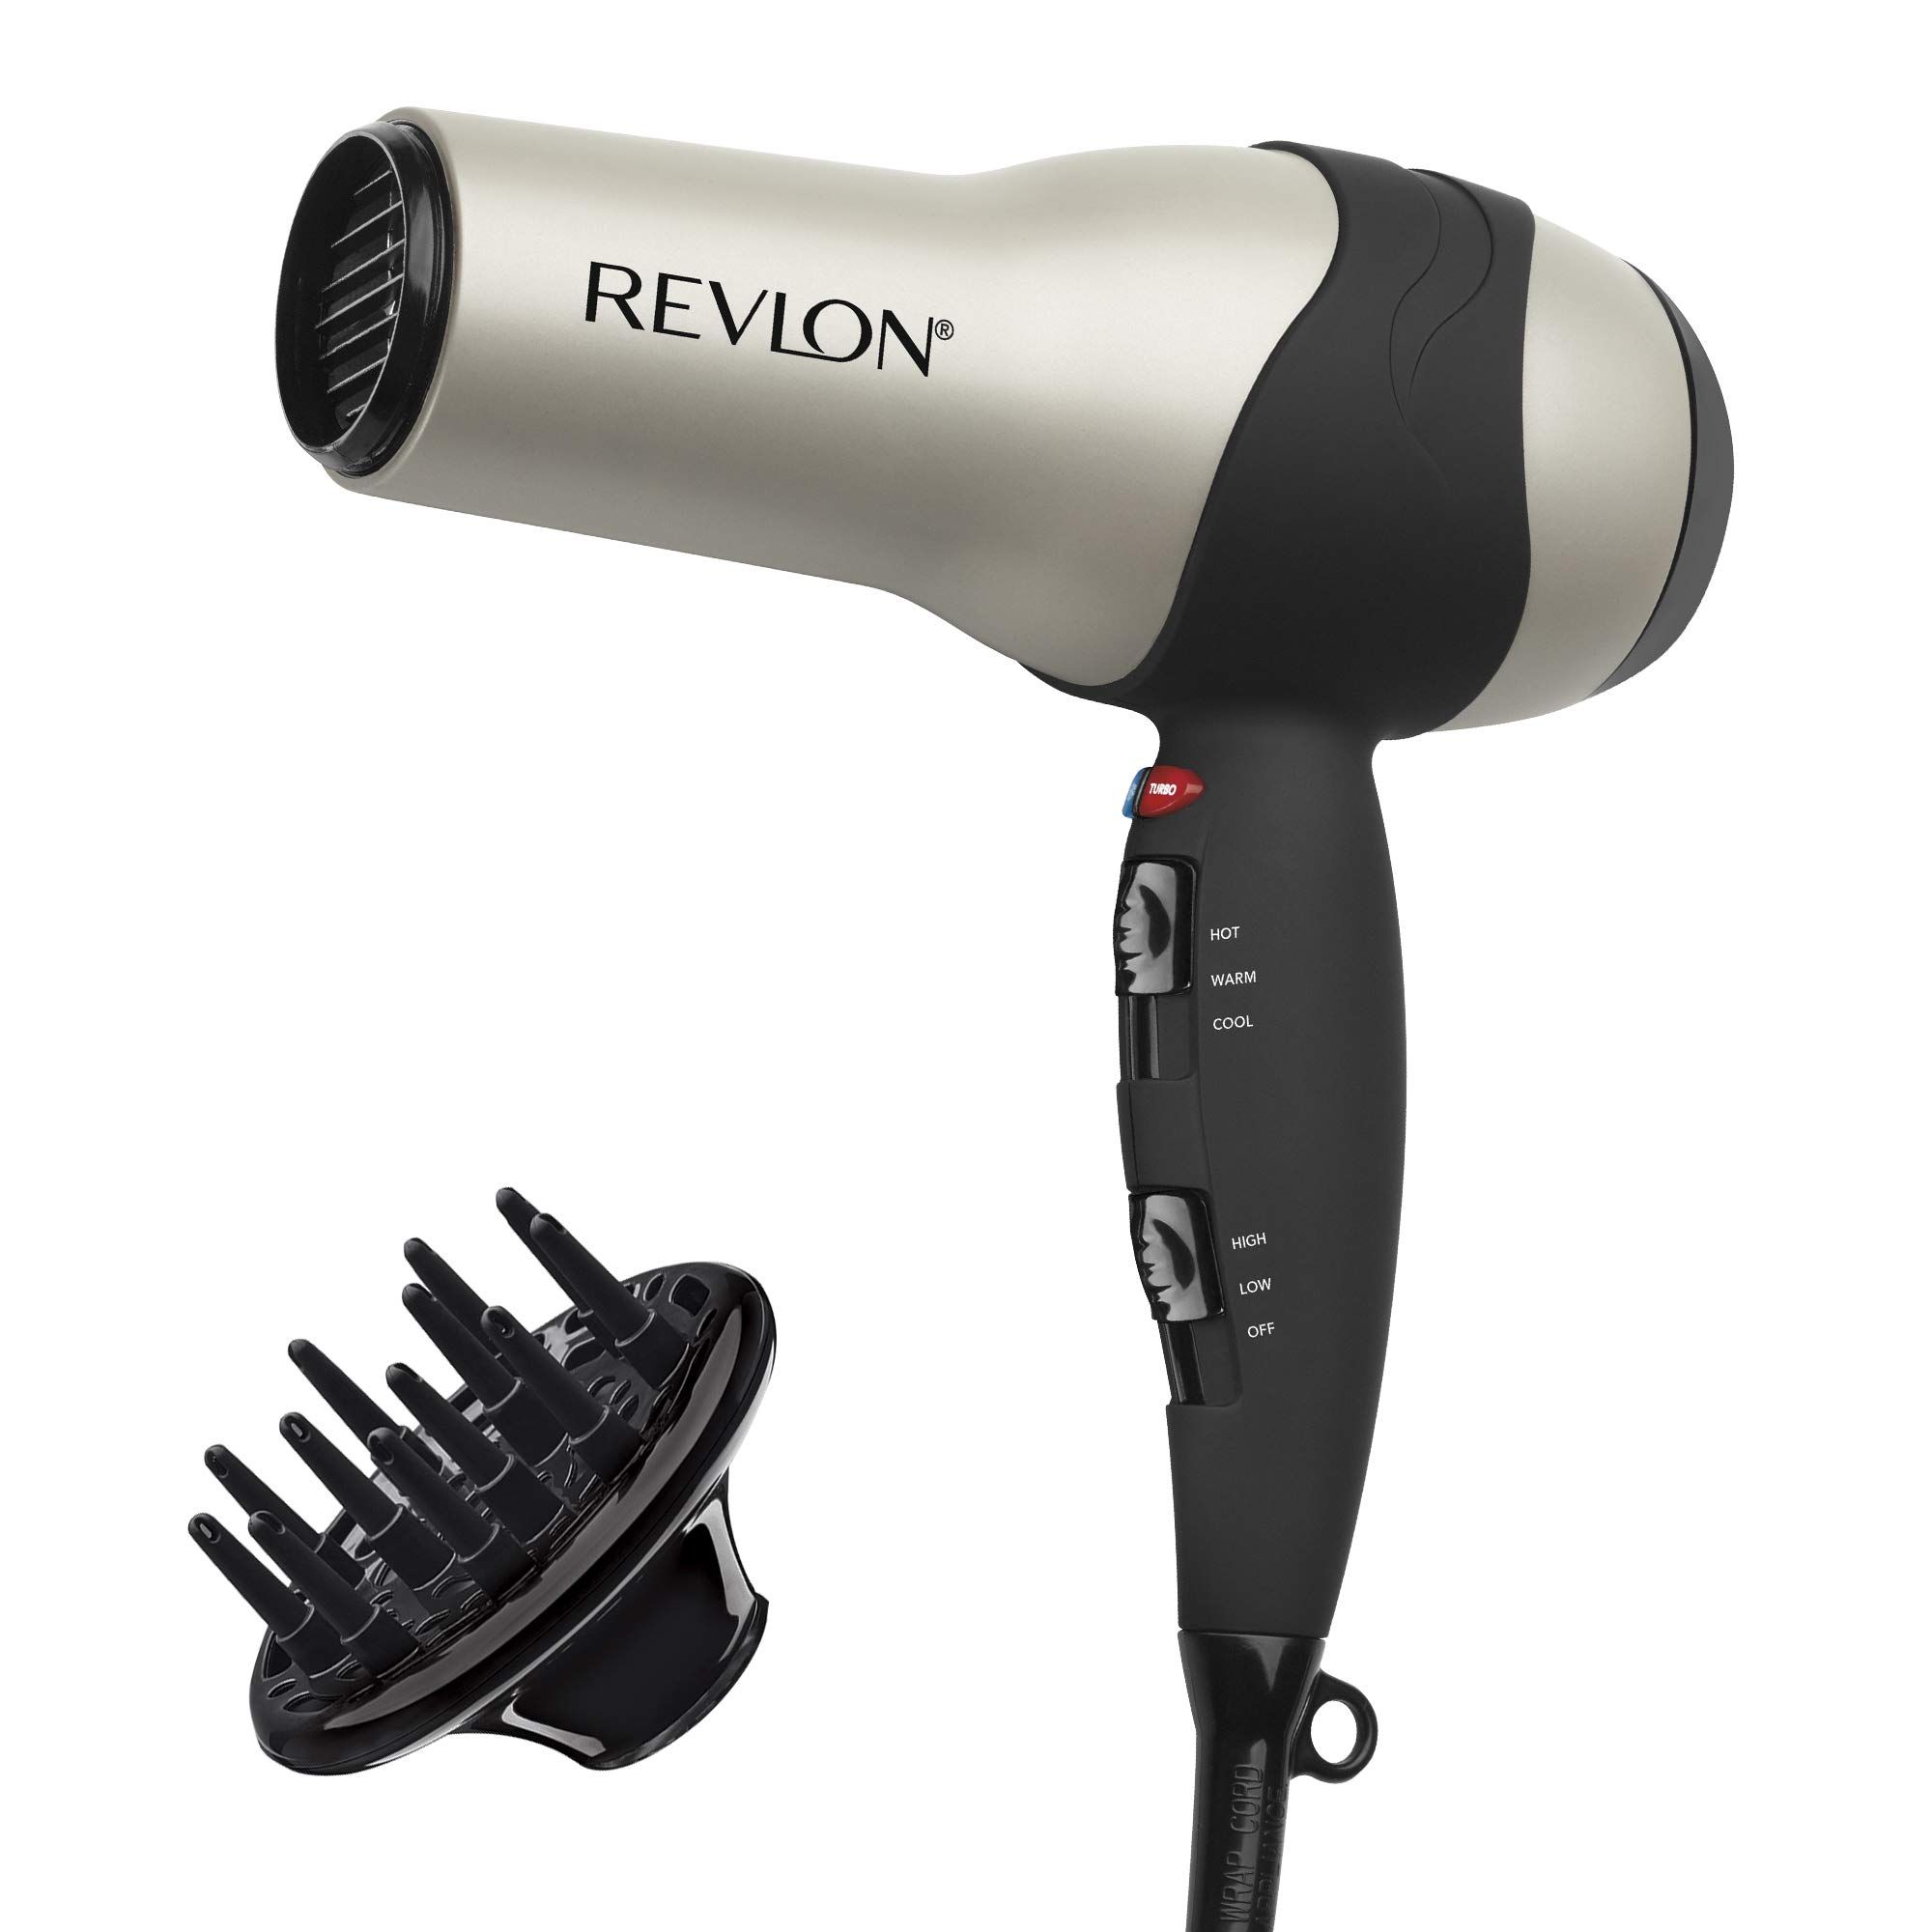 <p><strong>$19.99</strong></p><p>When it comes to classic hair tools, Revlon does it best. This classic blowdryer comes with a diffuser attachment for curly and wavy hair types, along with <strong>12 thousand five-star, raving reviews on Amazon</strong>. If you need a no-muss hair dryer, this is the one for you.</p>